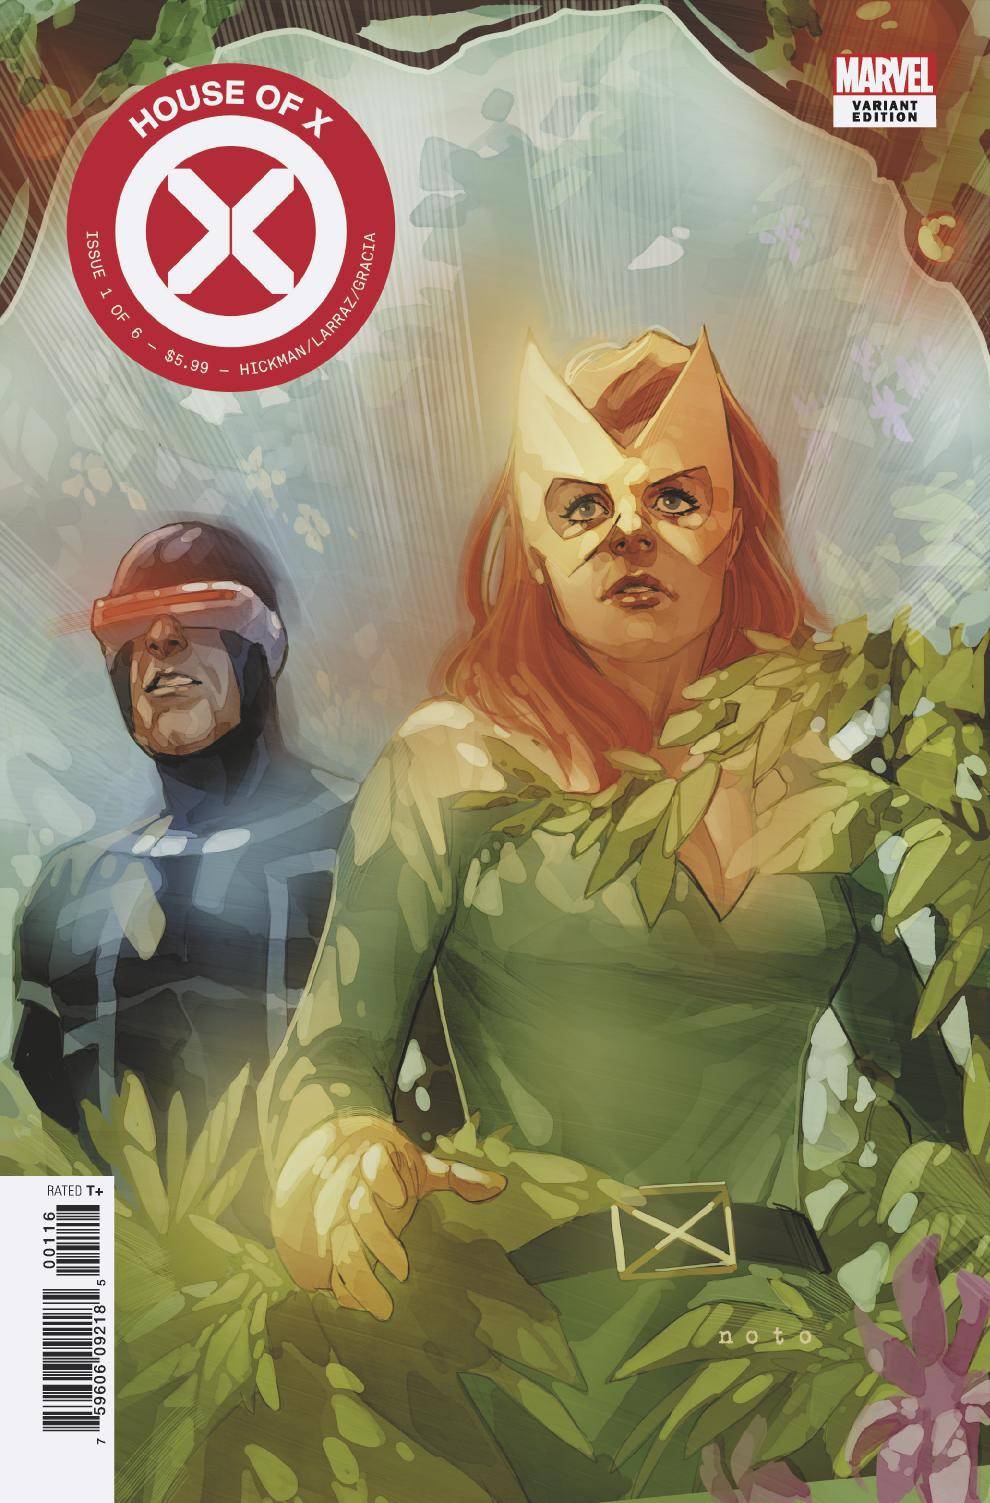 House of X #1 Noto Variant (Of 6)